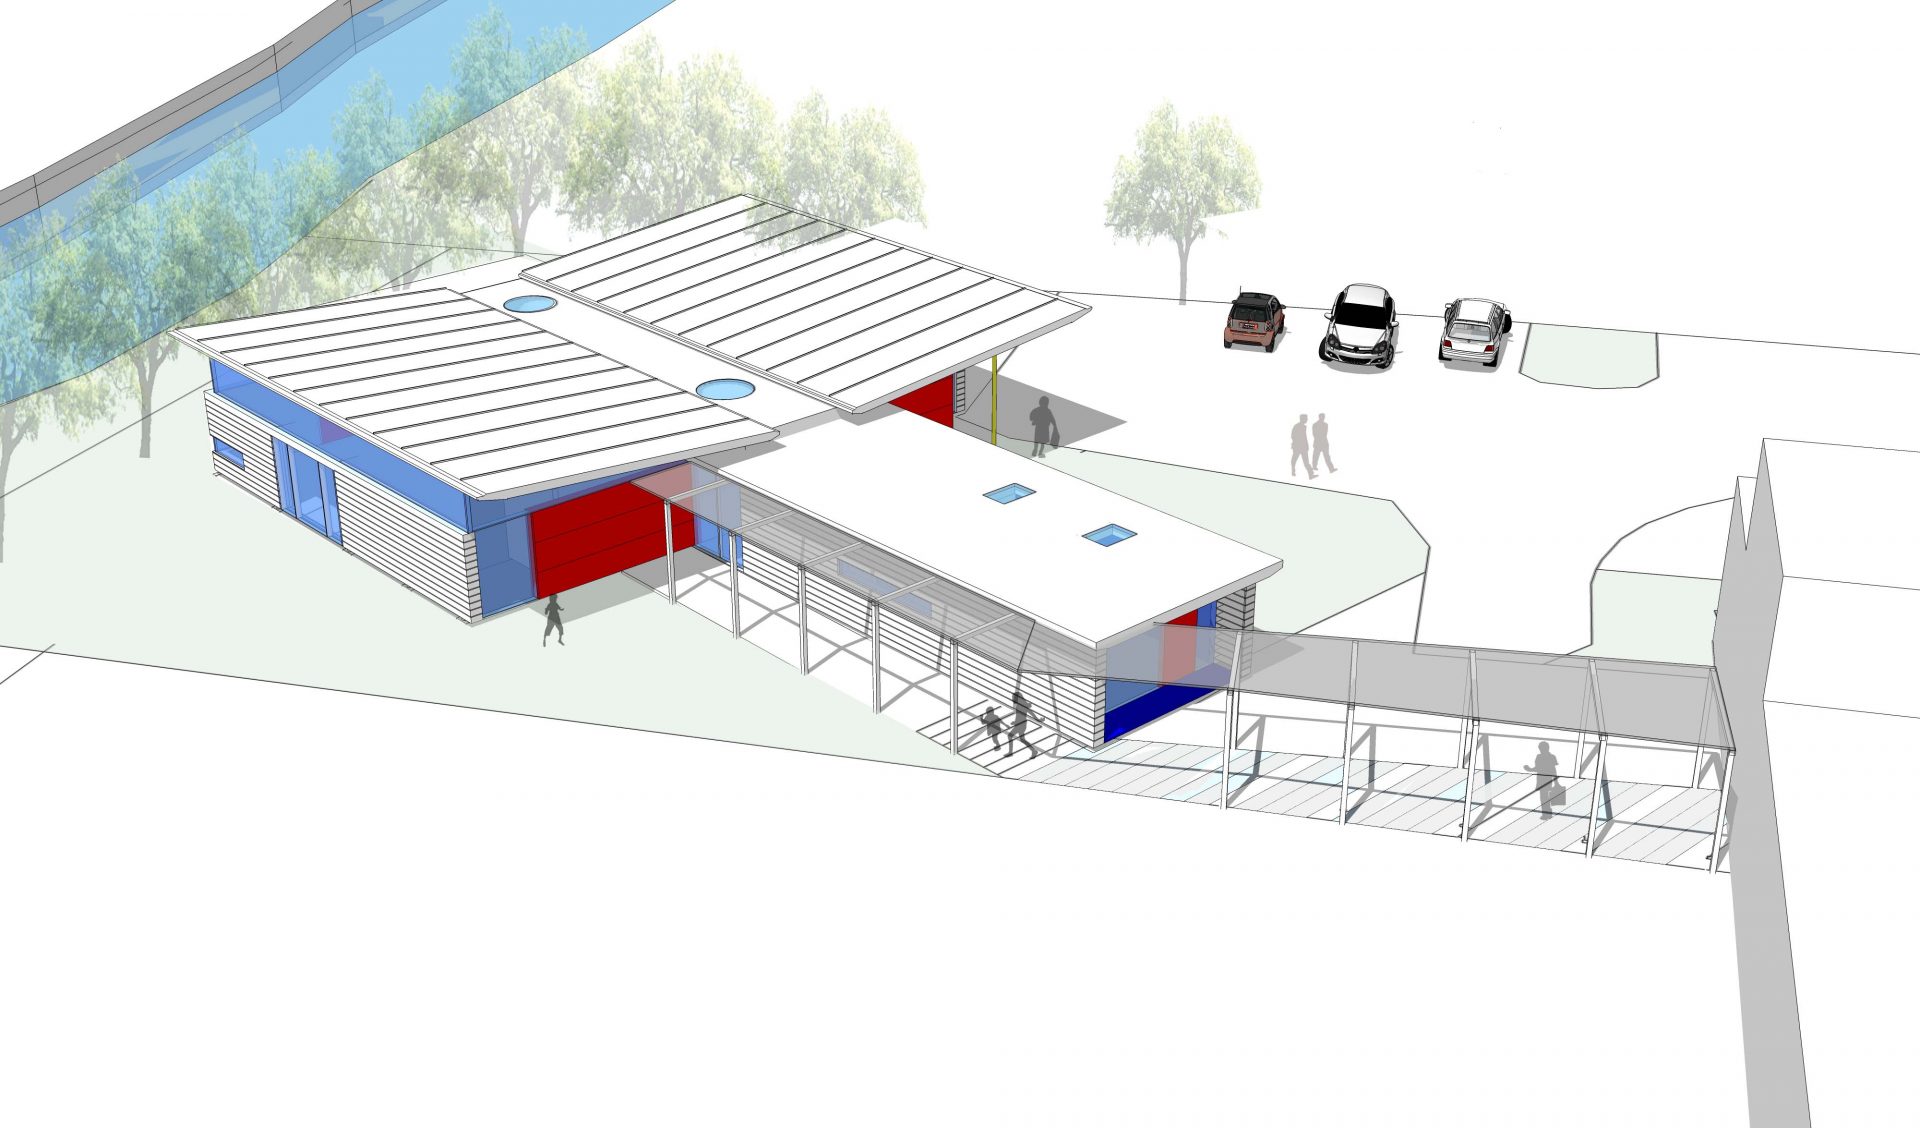 3d image showing model of sustainable school